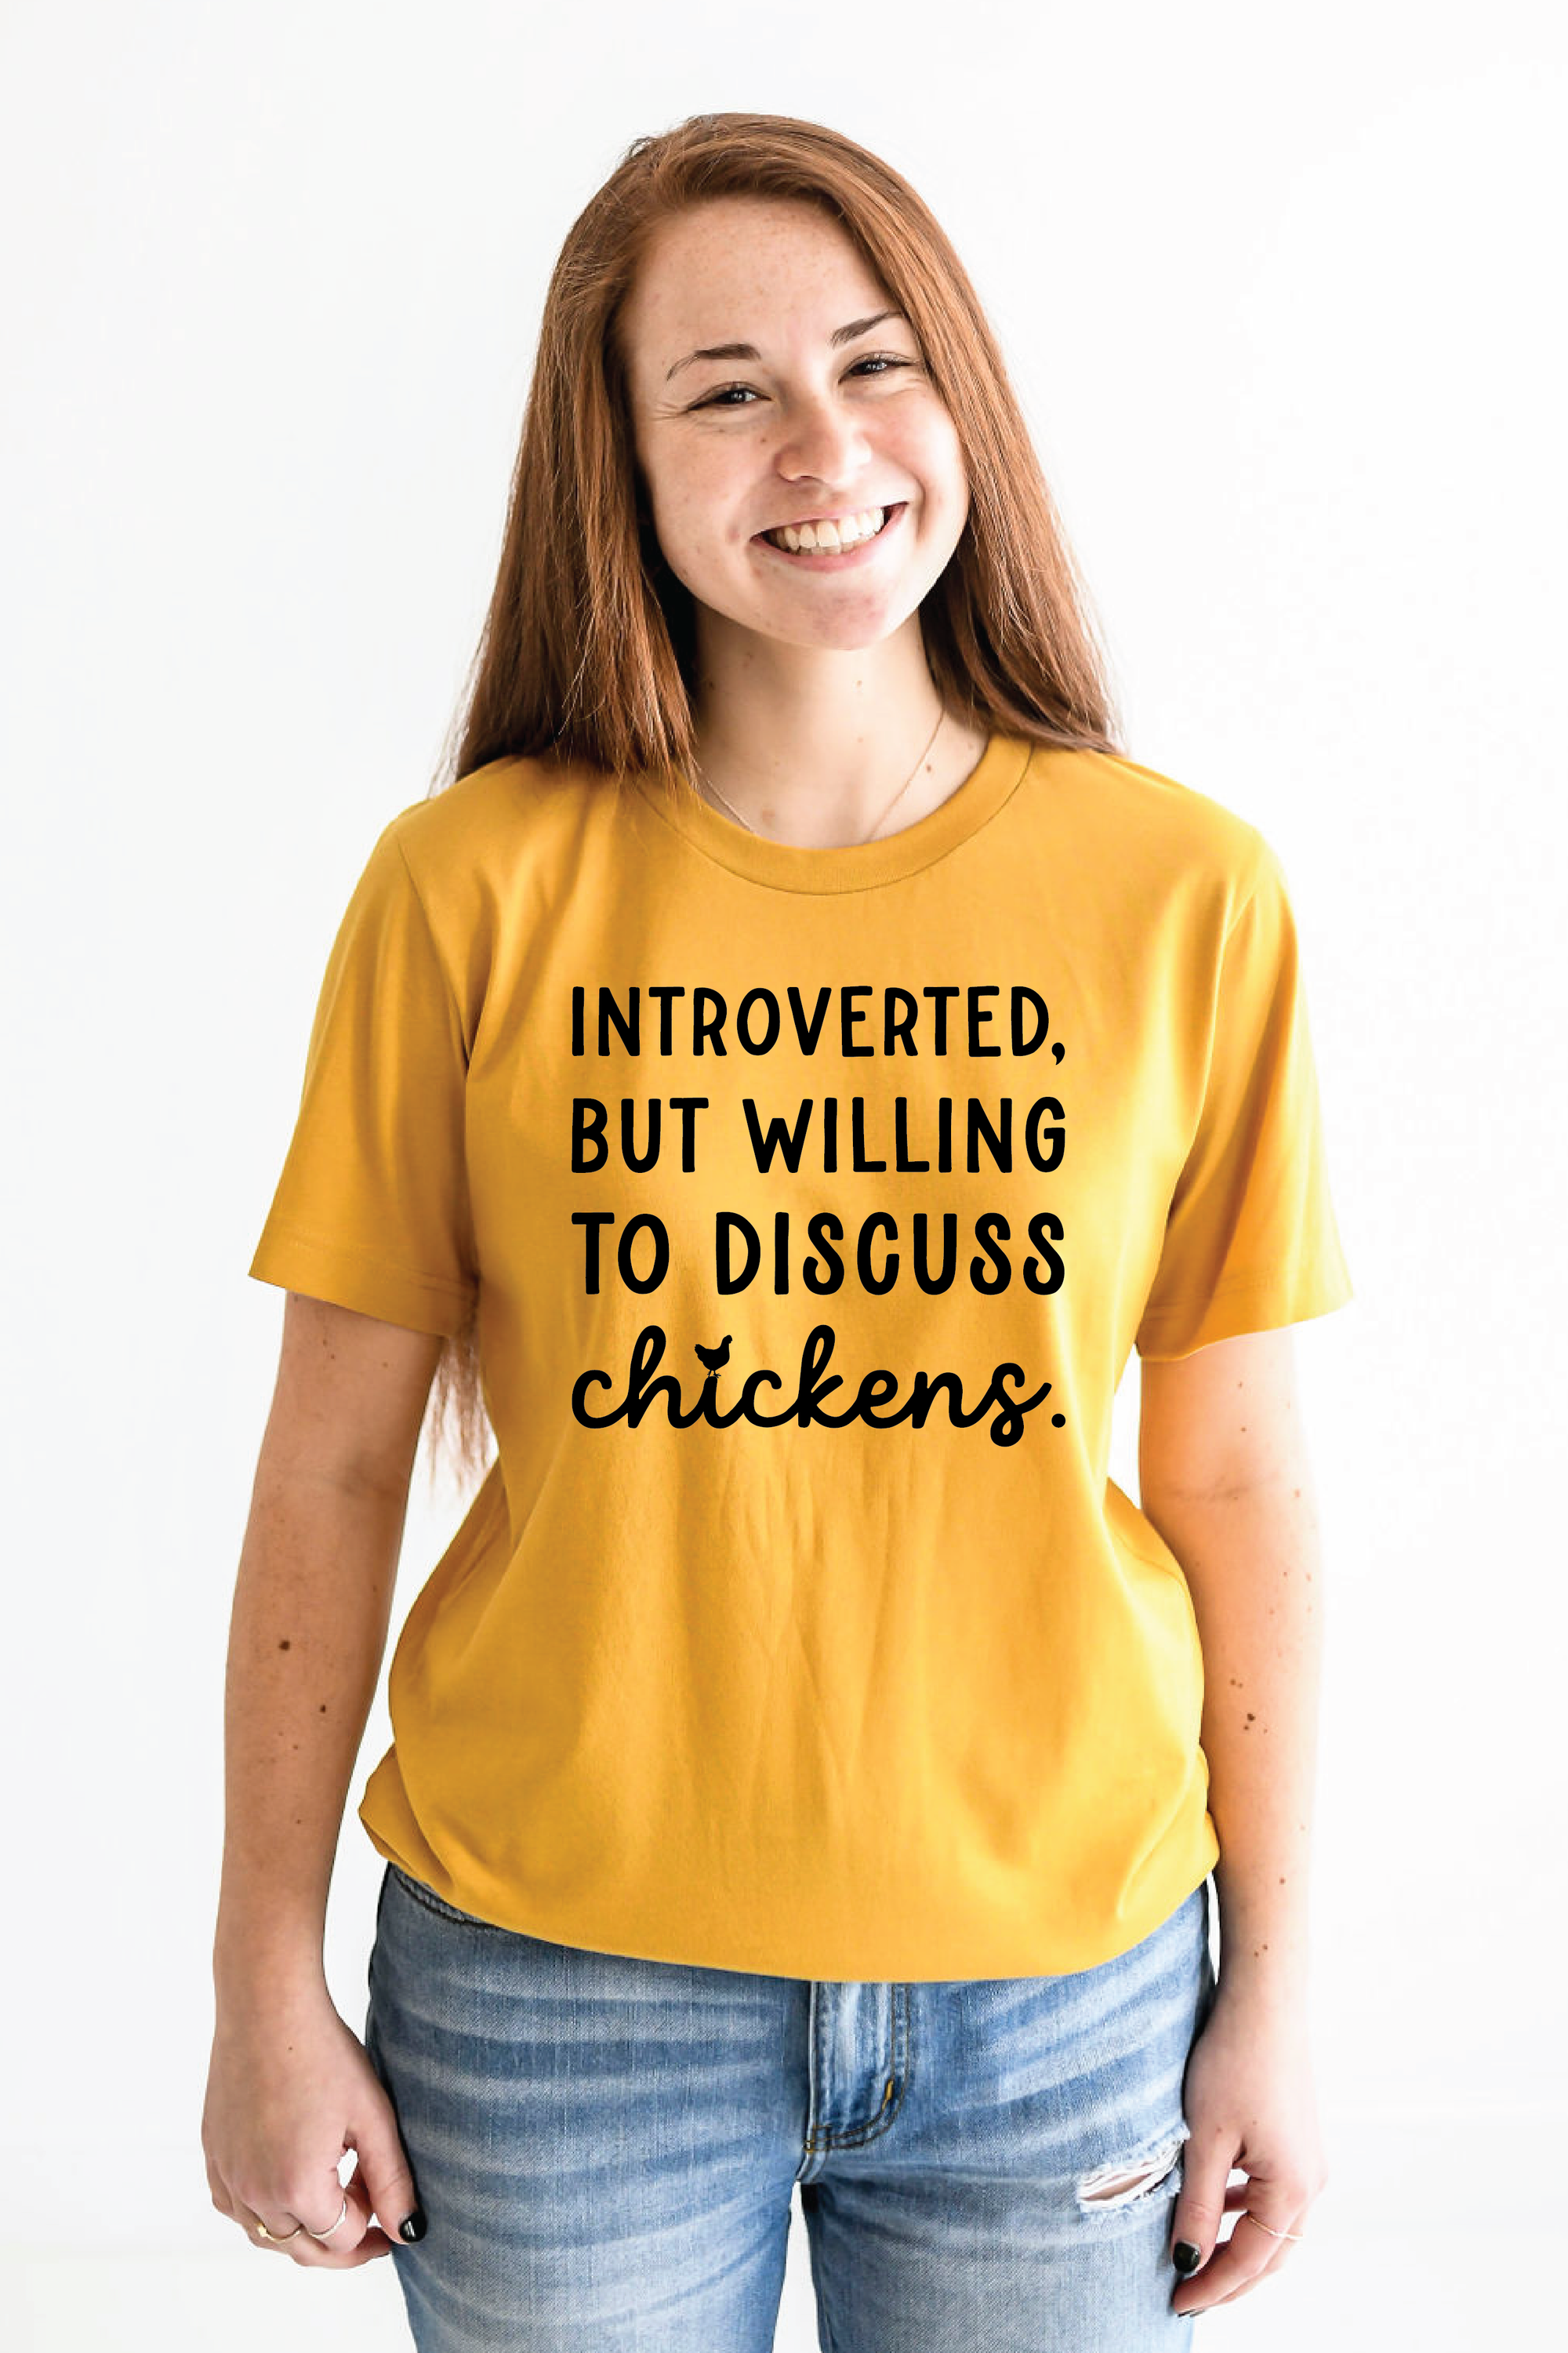 Introverted But Willing to Discuss Chickens Shirt